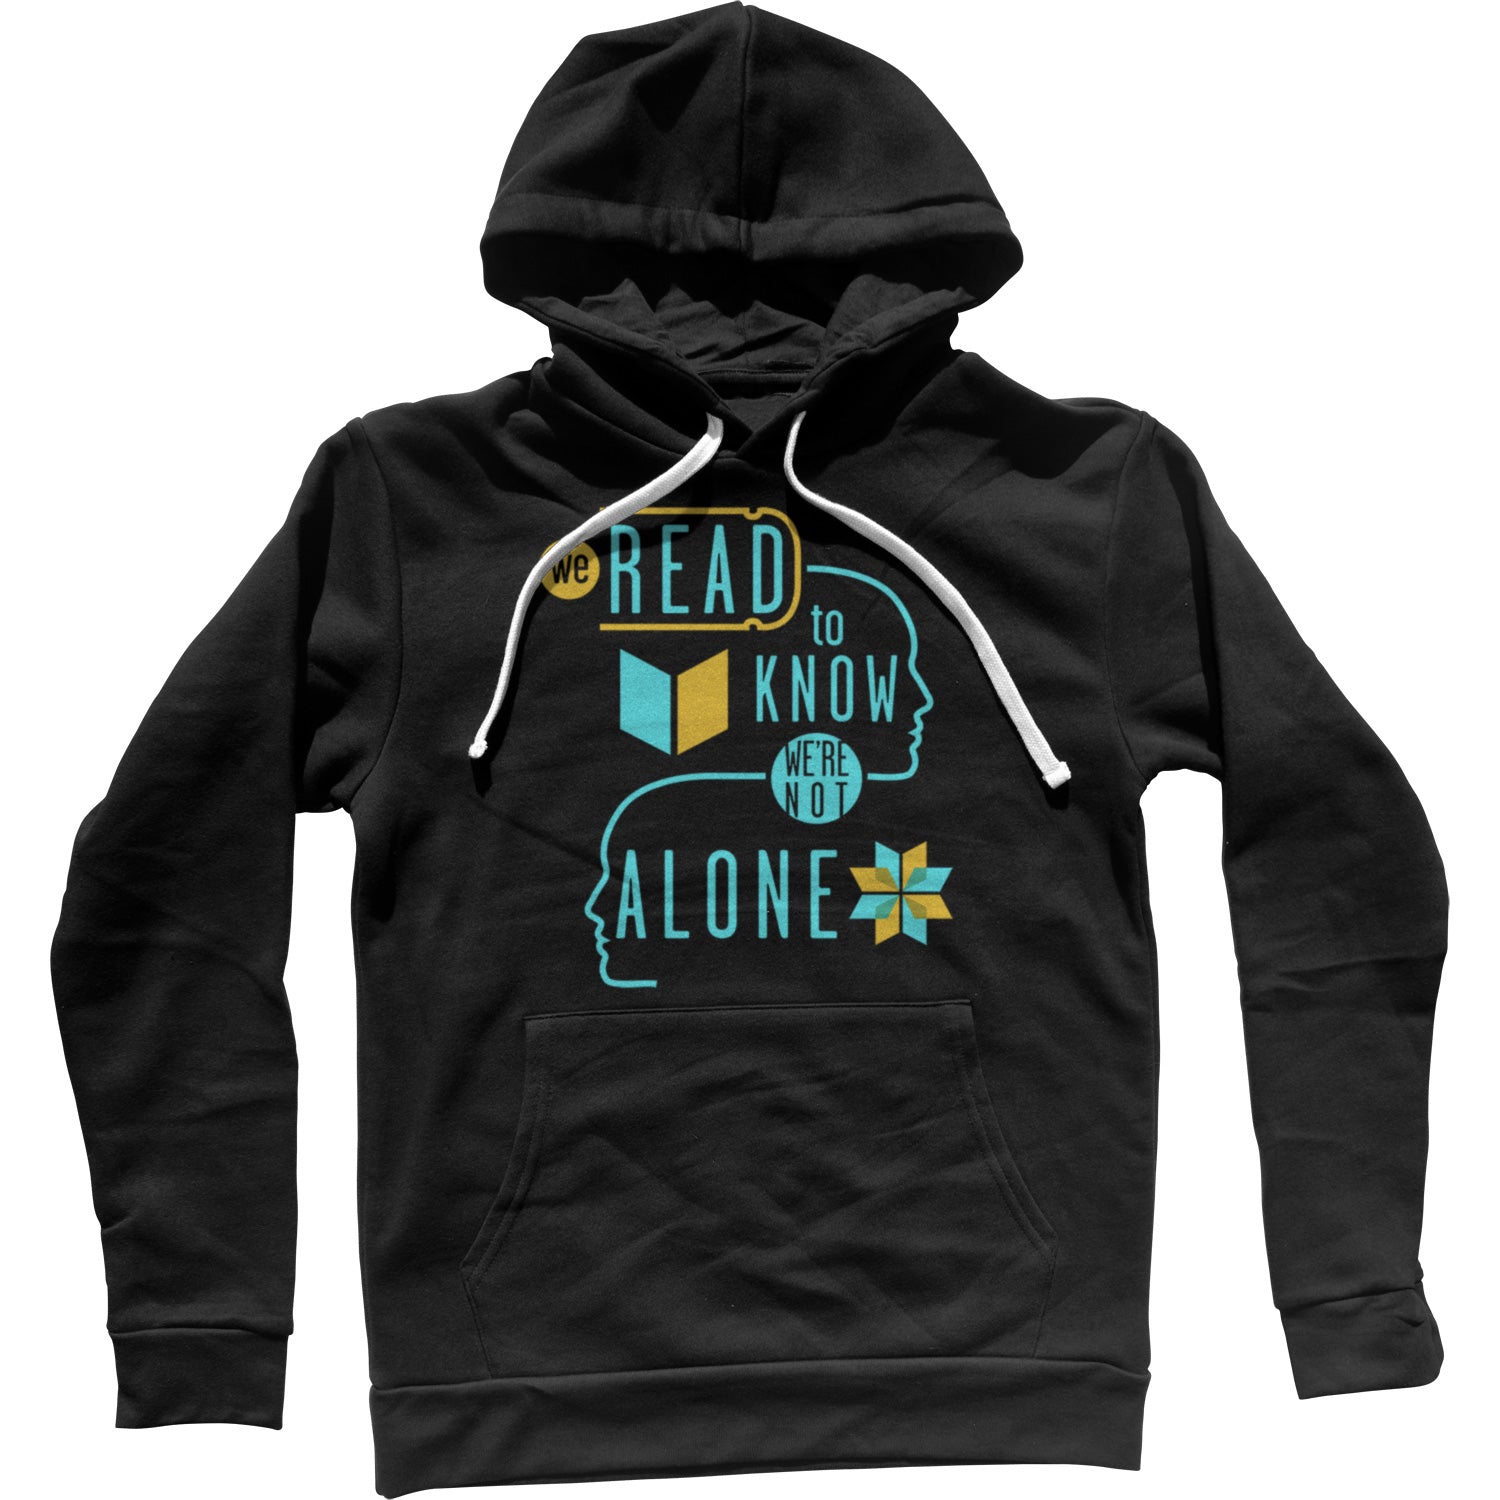 We Read to Know We are Not Alone Unisex Hoodie